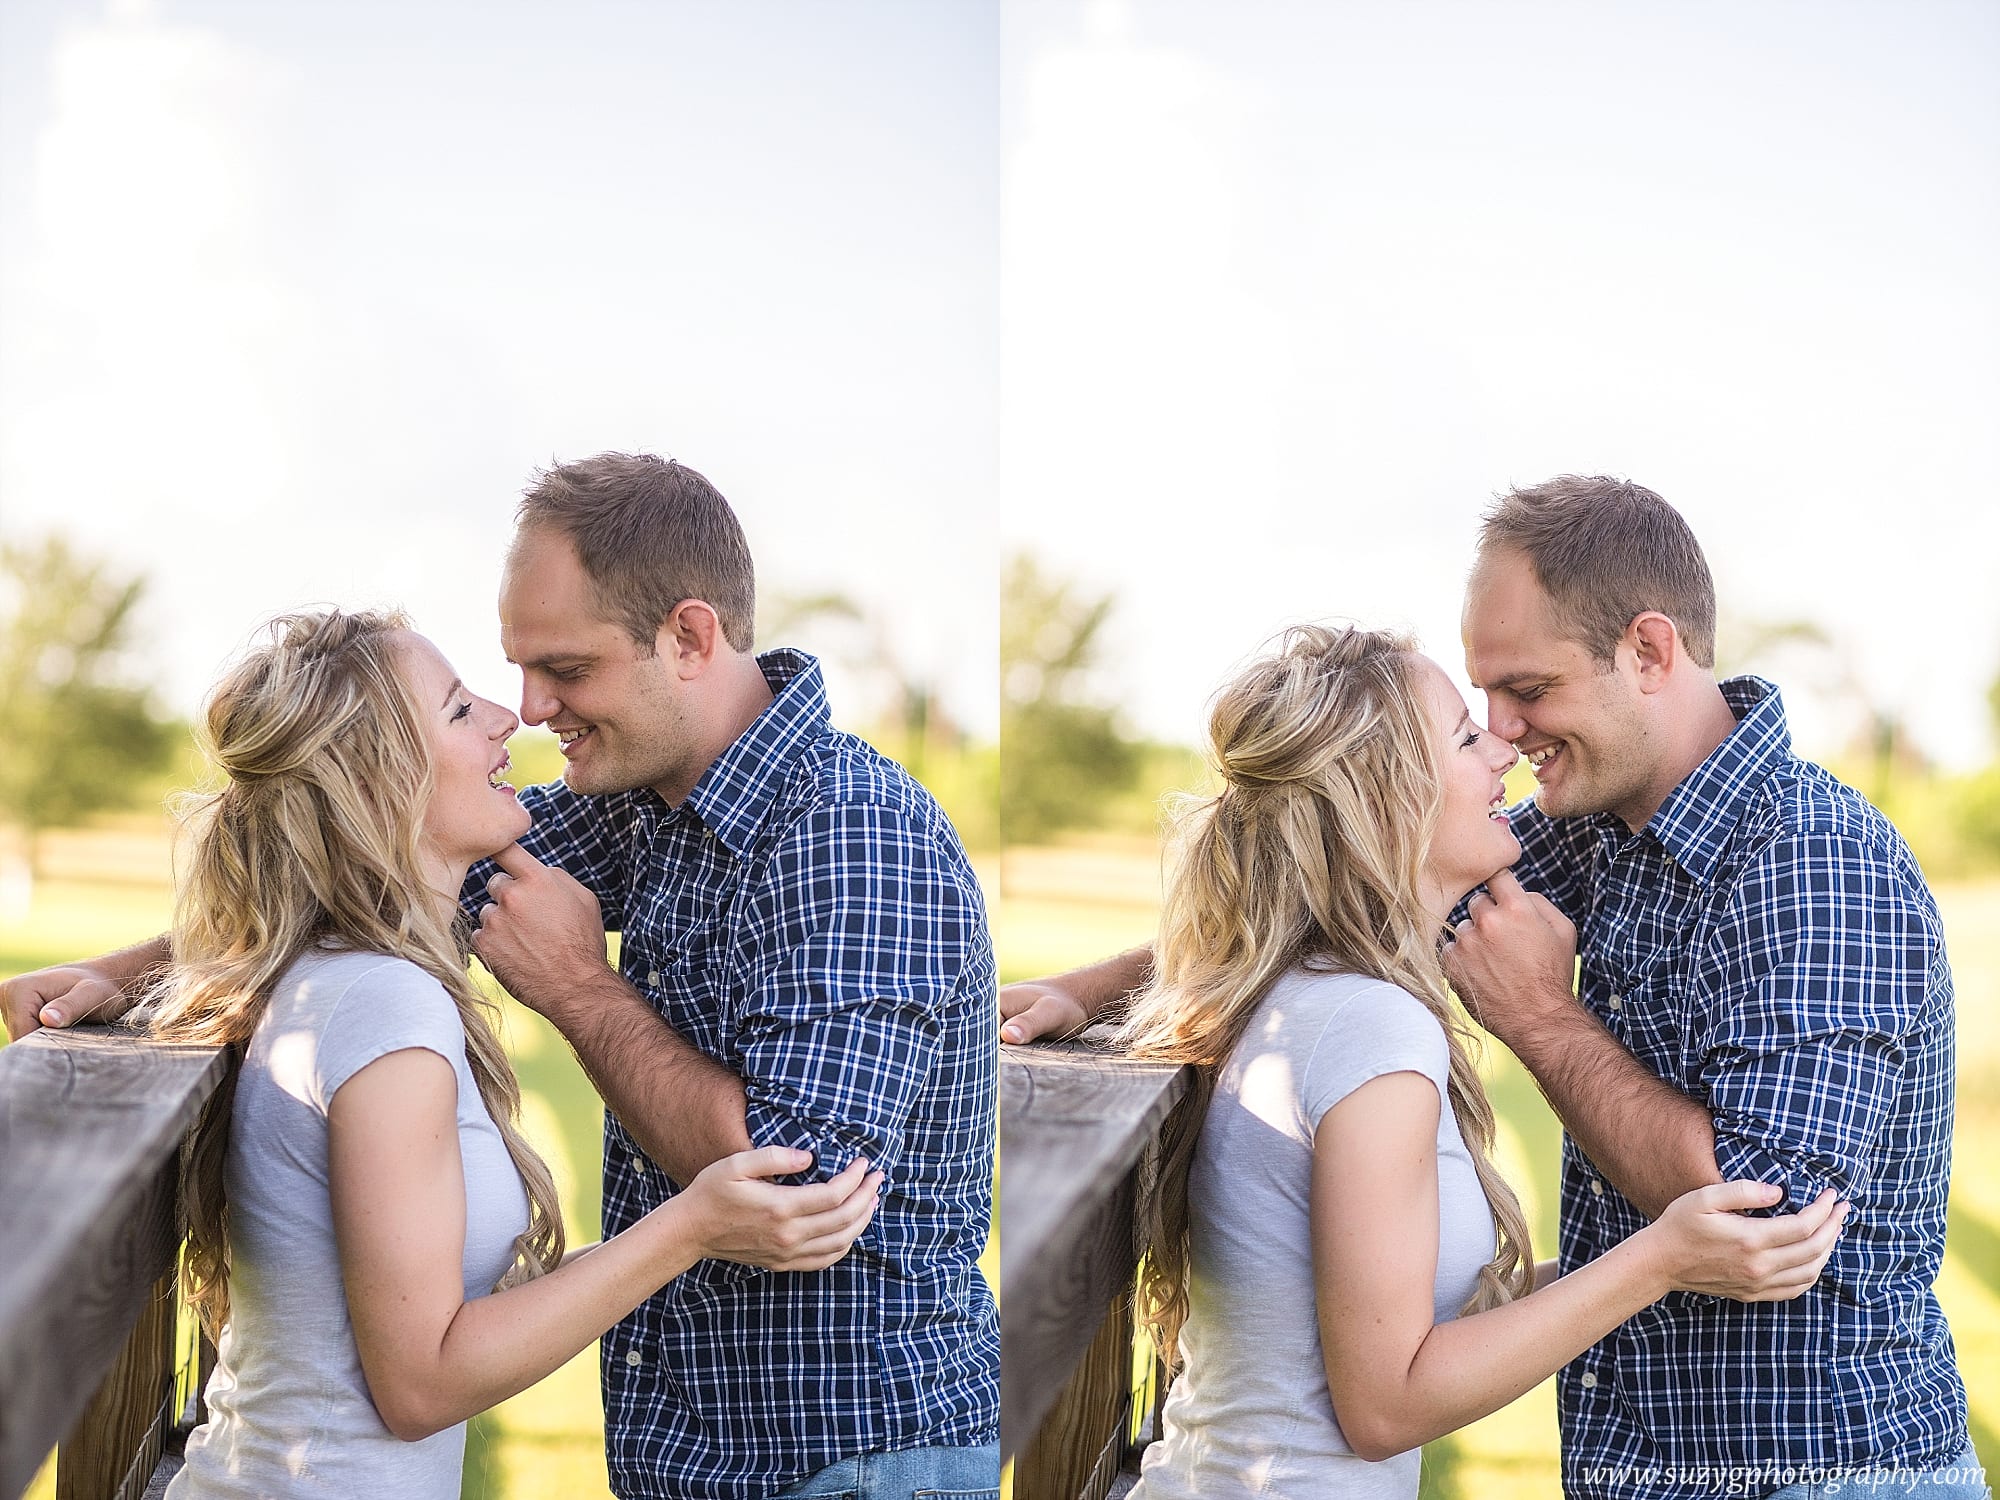 engagements-new orleans-texas-baton rouge-lake charles-suzy g-photography-suzygphotography_0020